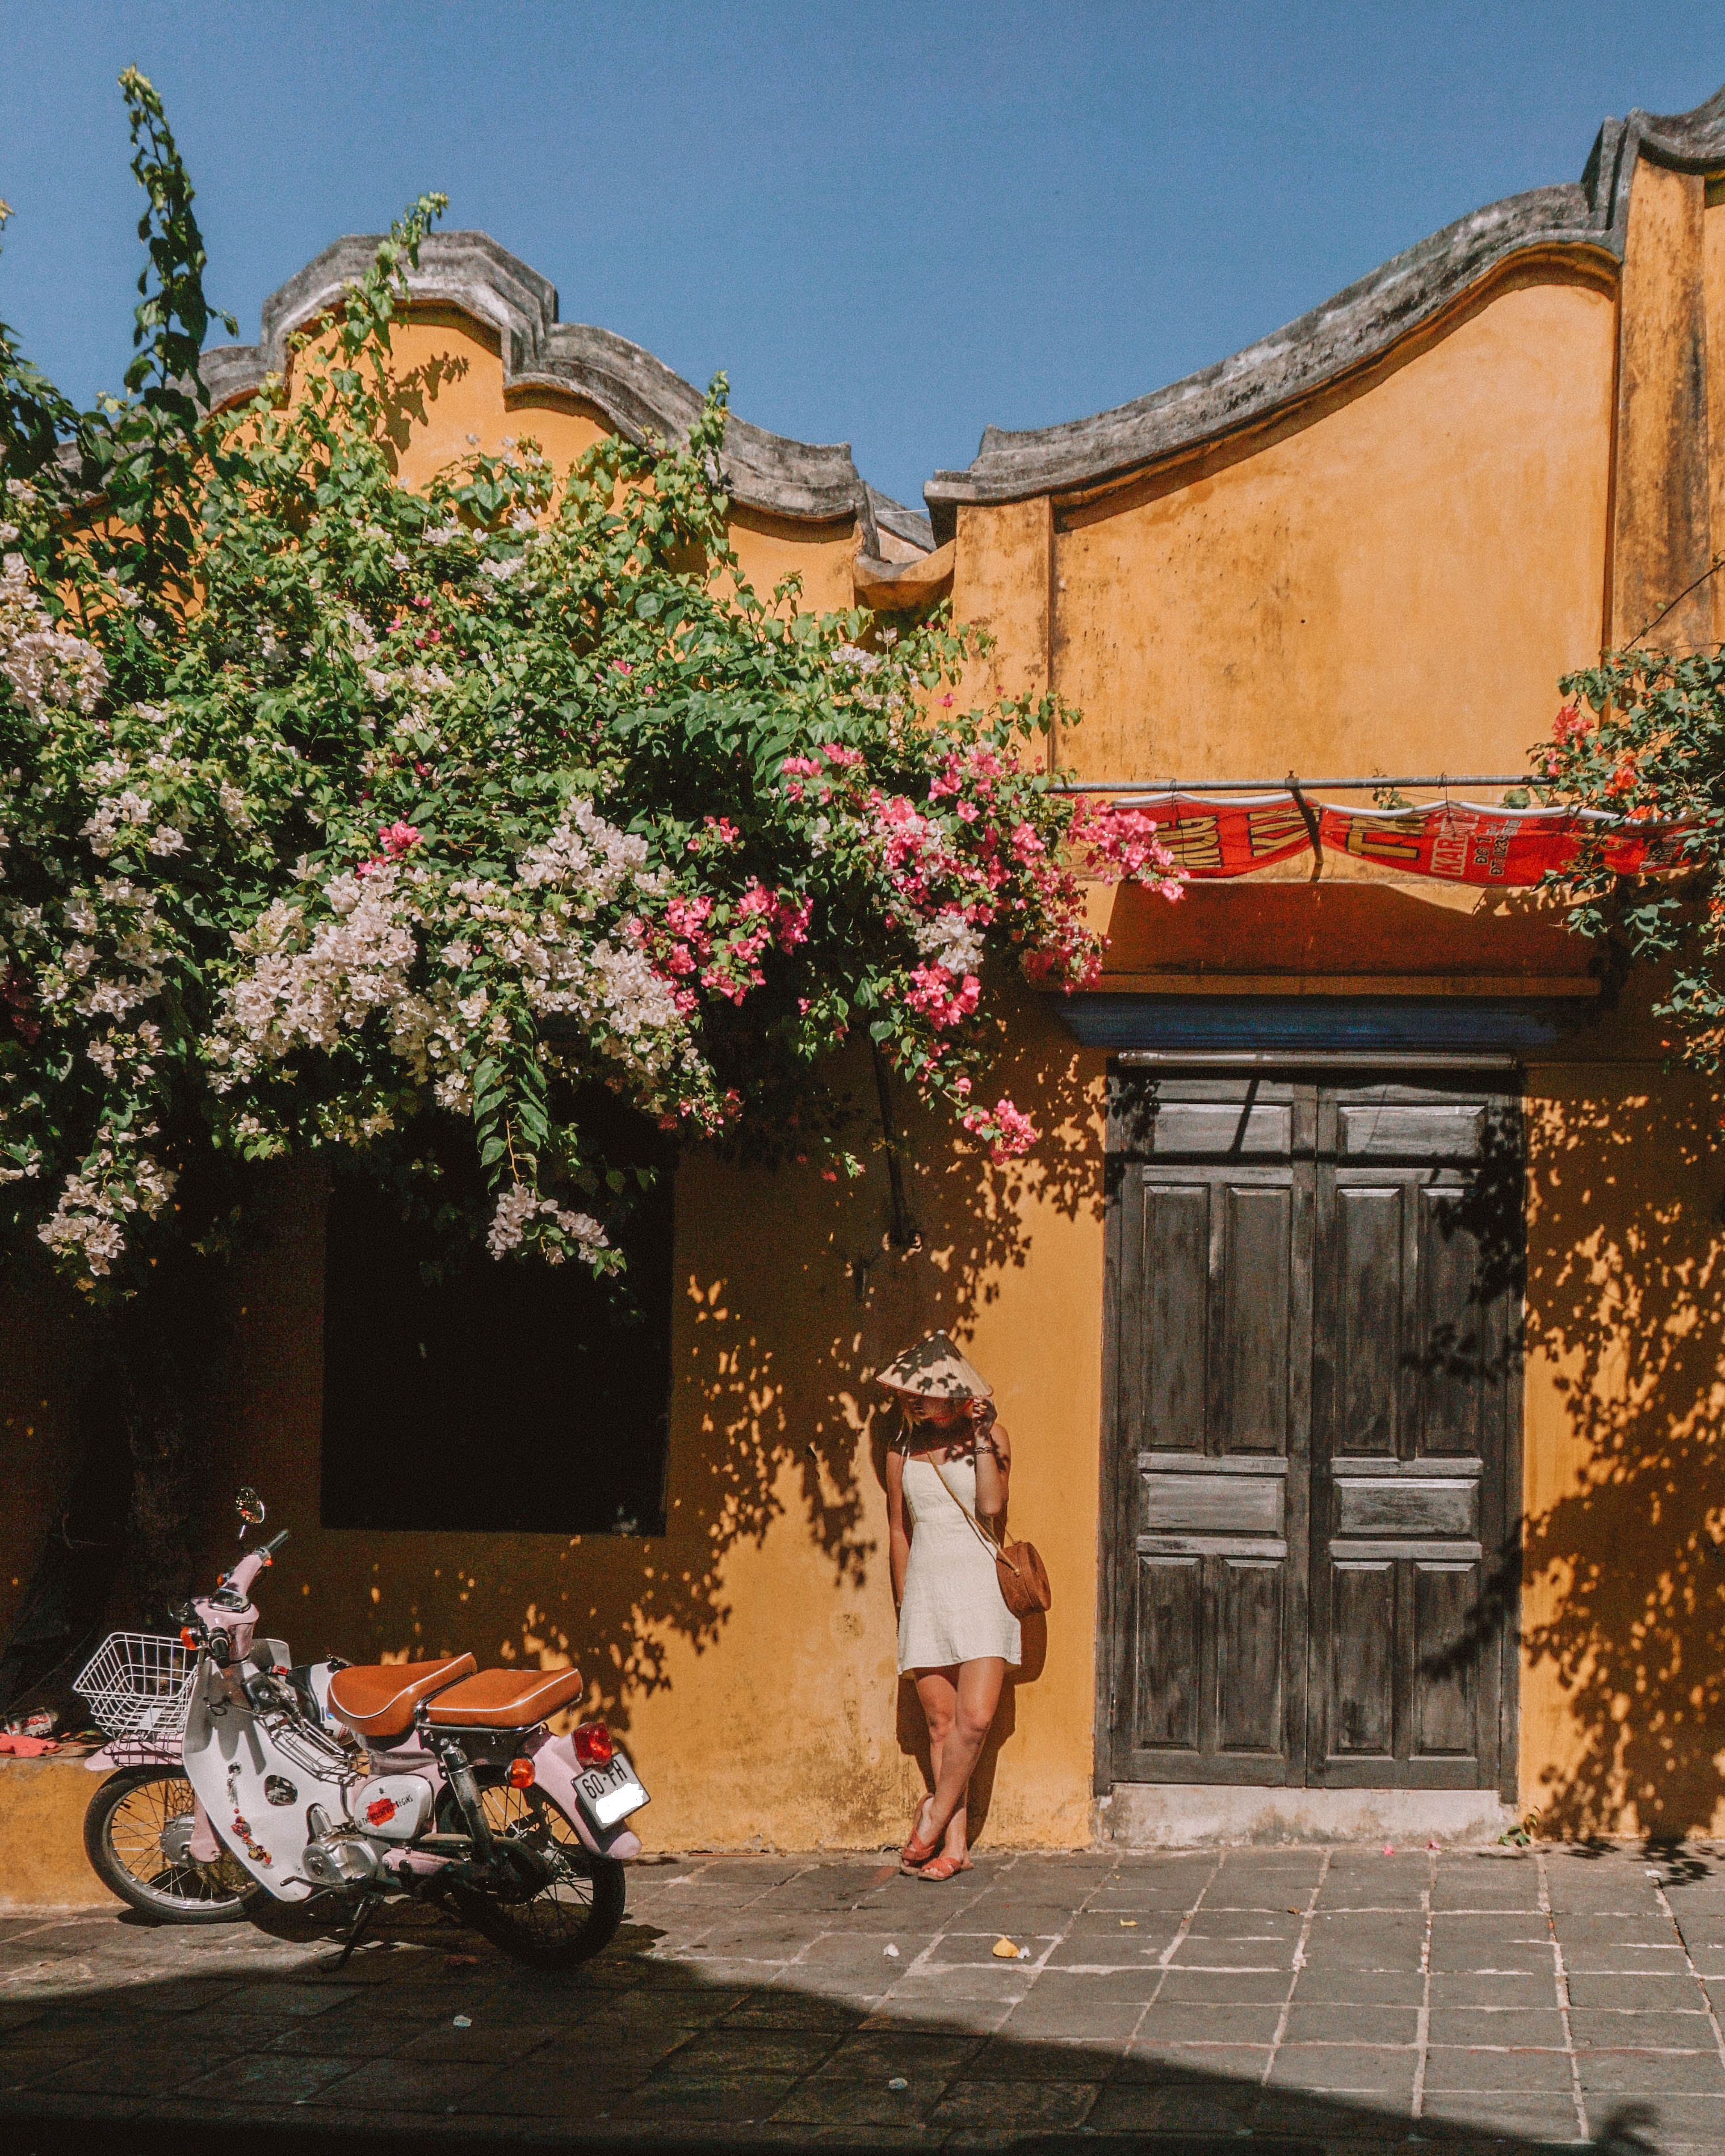 Frances in Hoi An Ancient Town, located in central Vietnam, in a photo she provided Tuoi Tre News